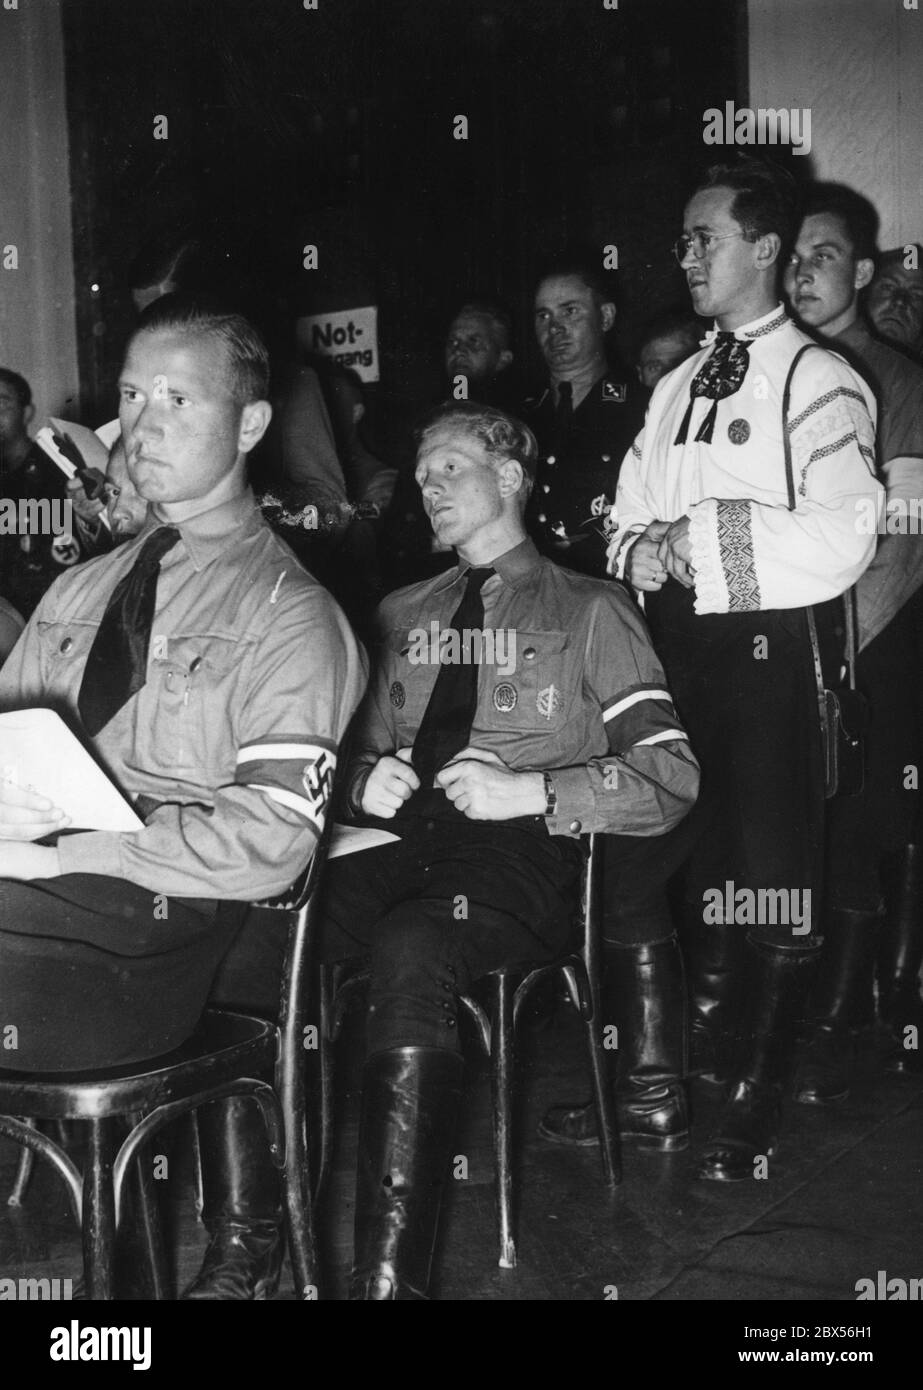 At the meeting of the National Socialist German Students' League in the Kulturvereinshaus during the speech of Reich Student Leader Gustav Adolf Scheel. On the right is a guest from Transylvania. Stock Photo